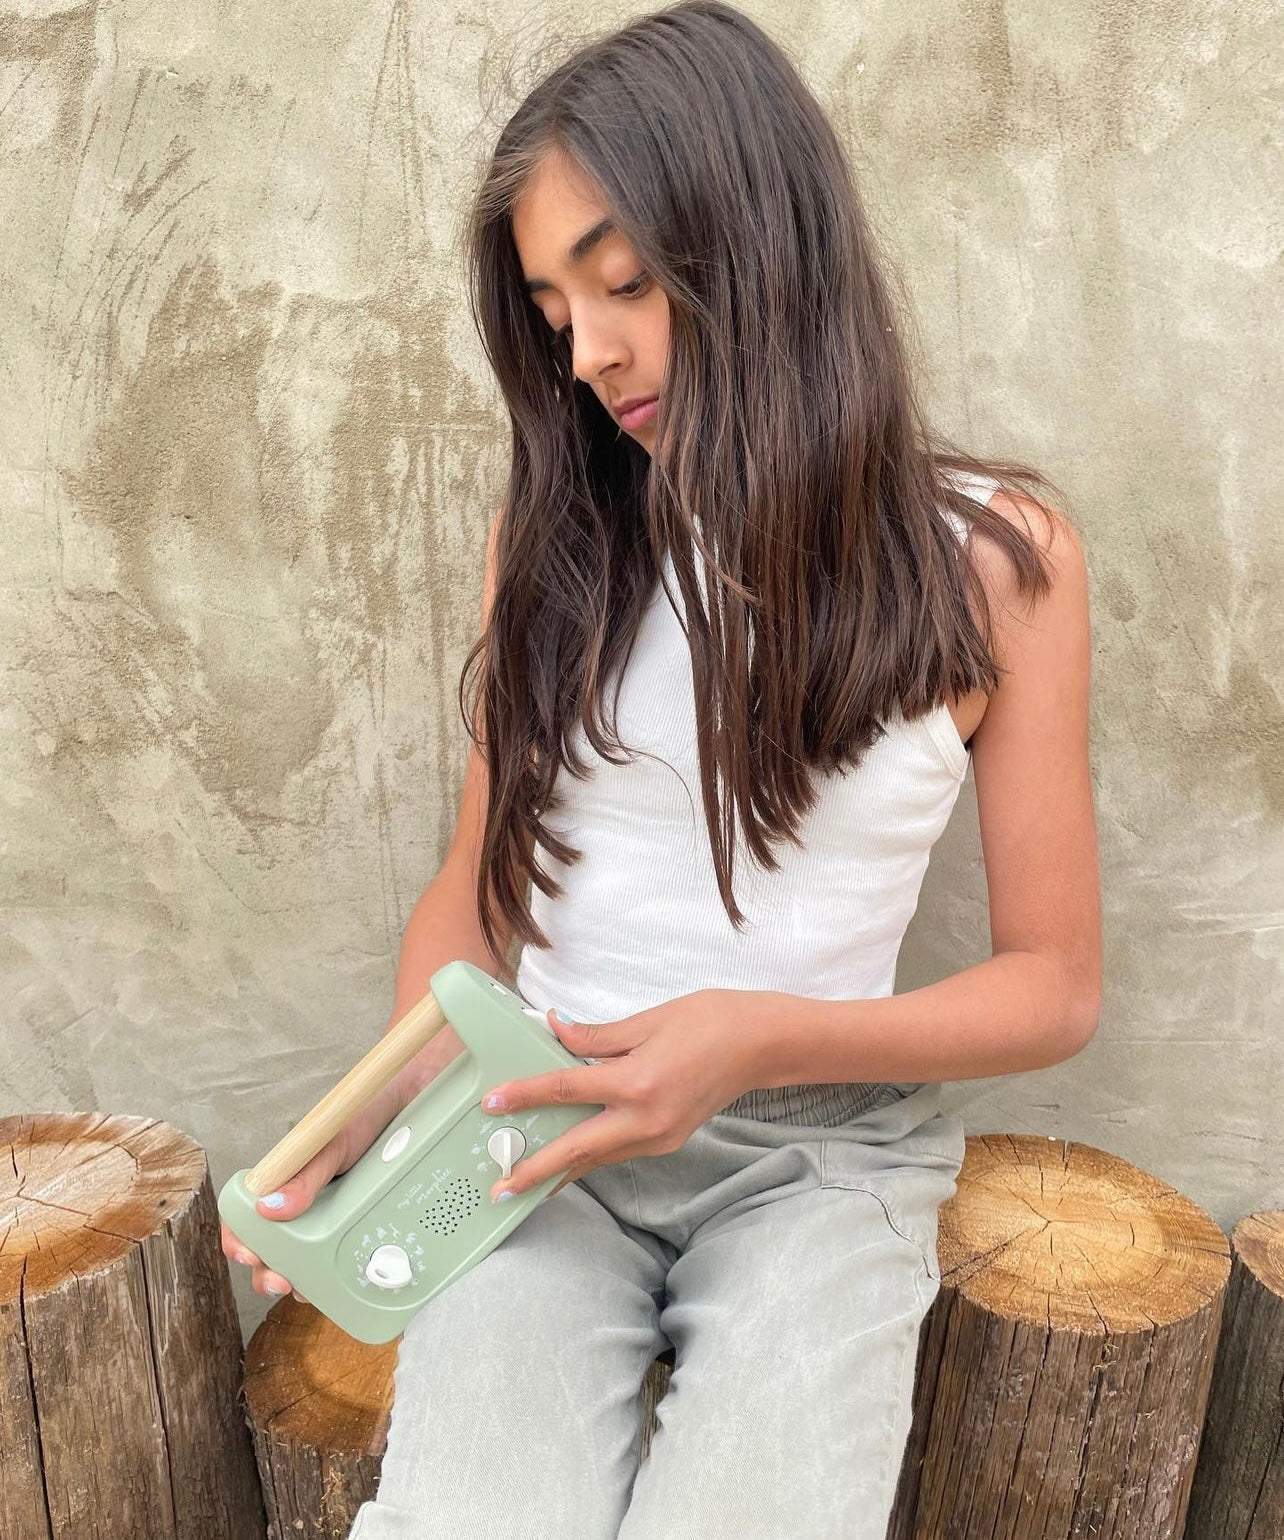 My Little Morphée Meditation Box – English/American/Spanish/German  Multi-Language Version – Promotes Sleep and Restores Calm for Children from  3 Years Old – No Radio Waves and No Screen : : Sports 